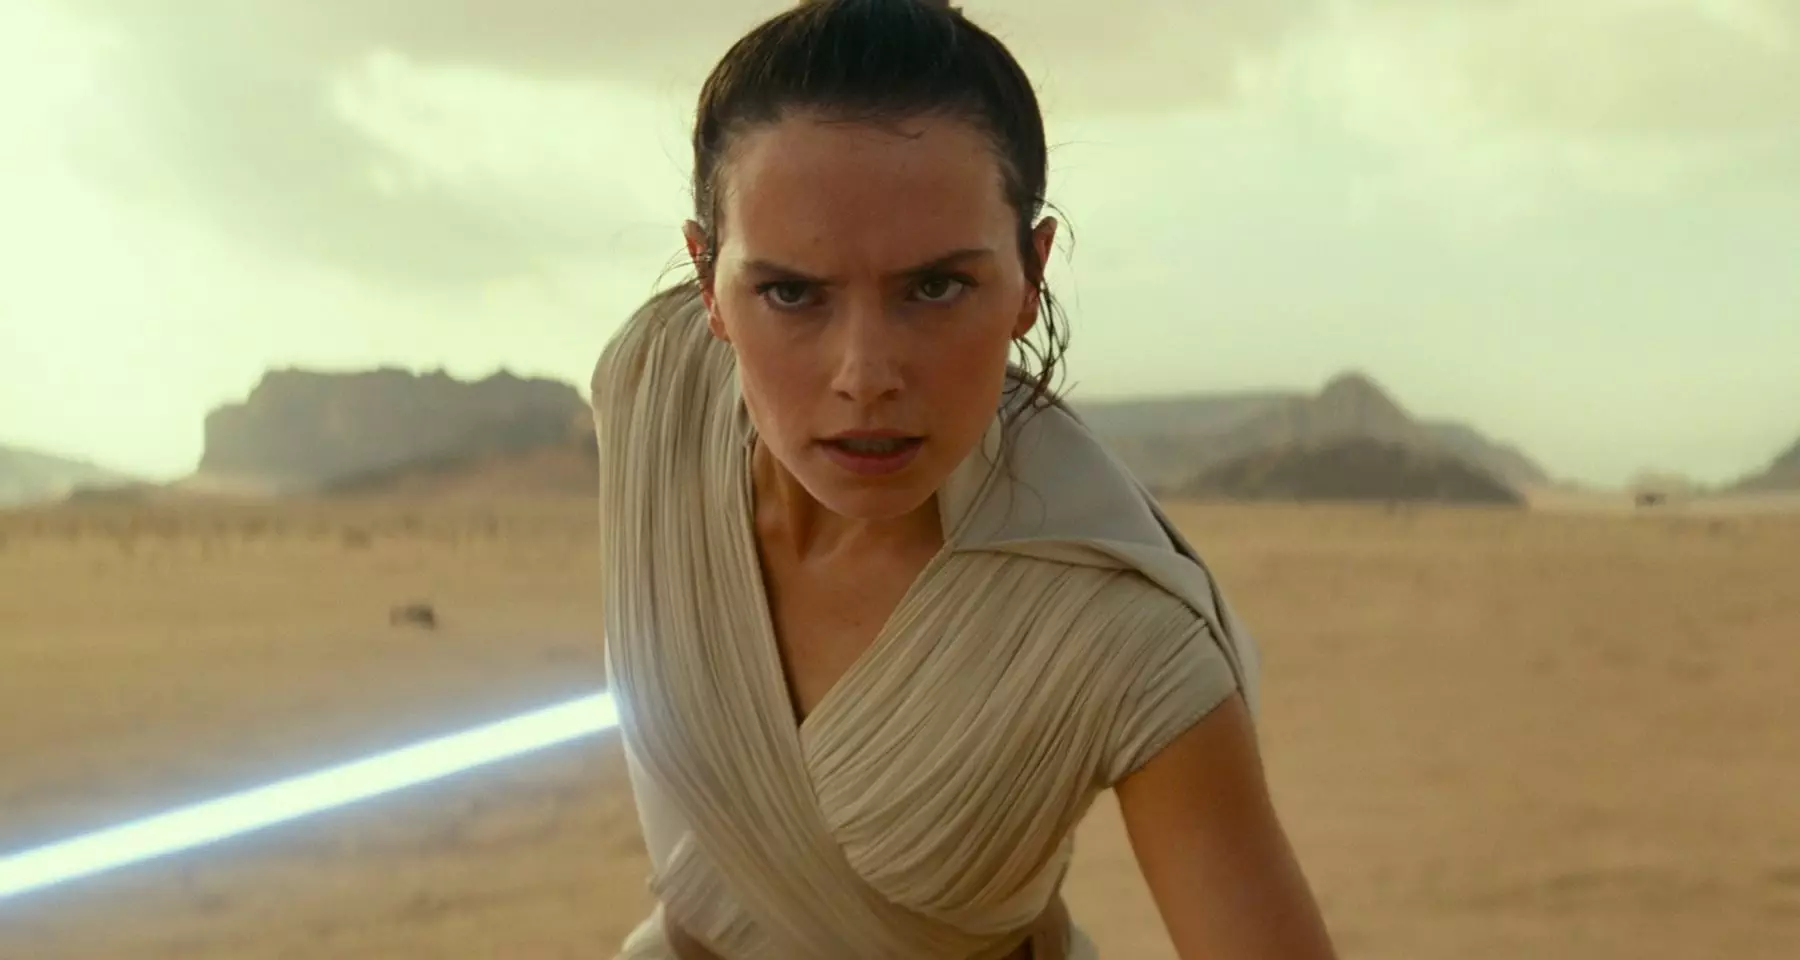 Star Wars: The Rise of Skywalker editor praises benefits of new editing process